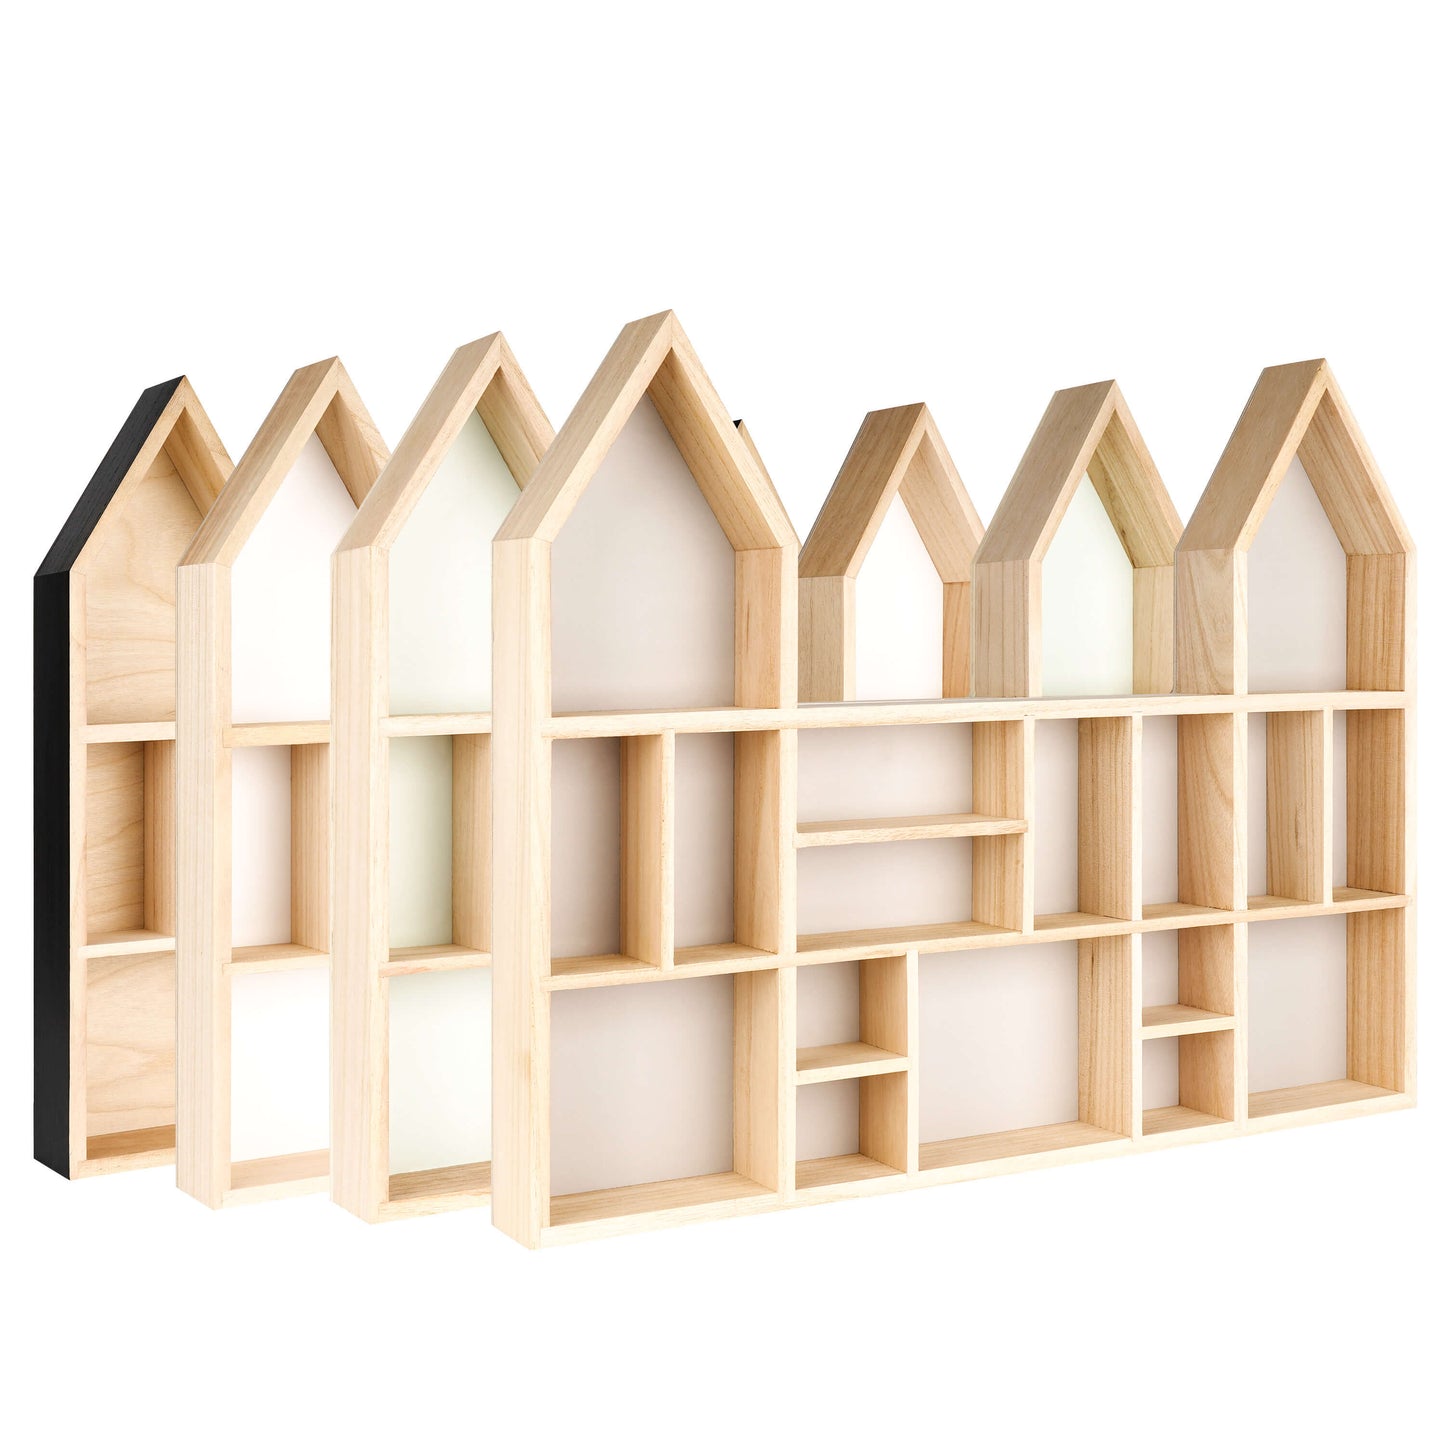 Castle shaped wooden toy display shelf - all color variations displayed side by side (side view)